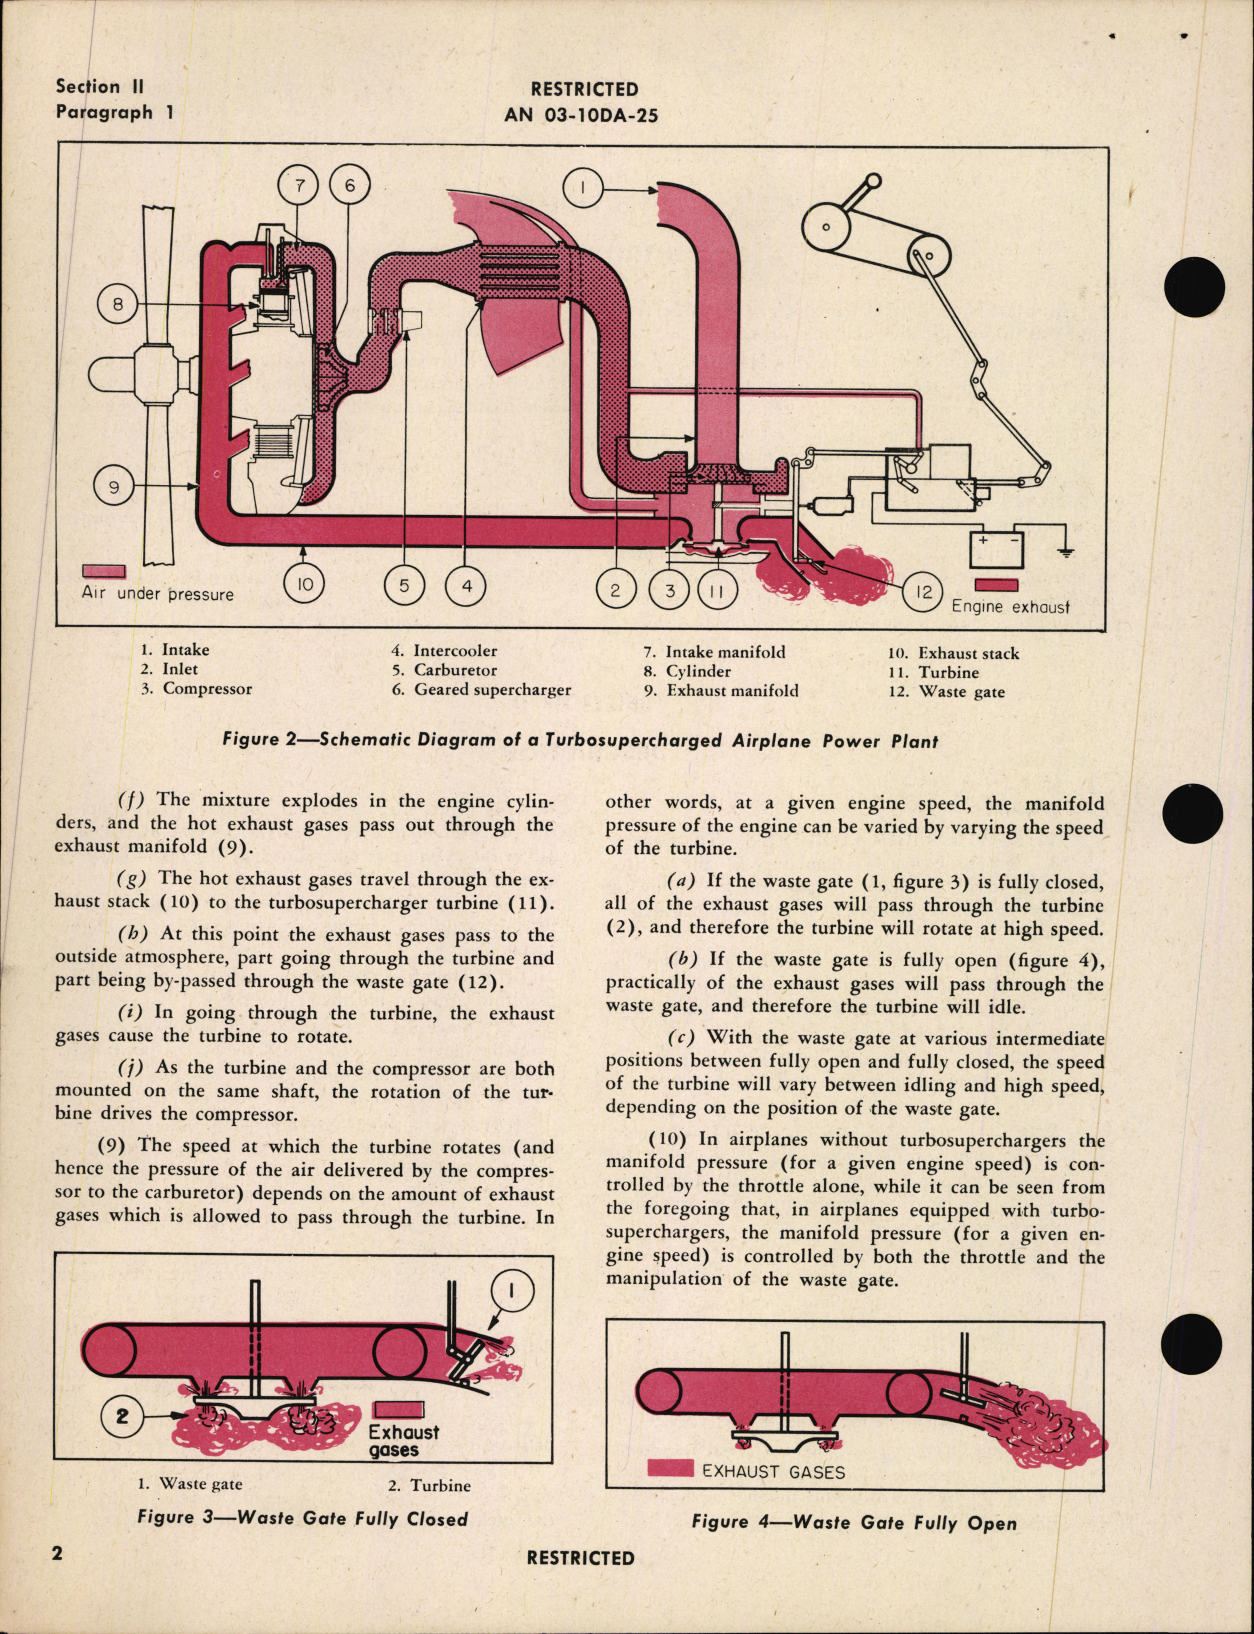 Sample page 6 from AirCorps Library document: Handbook of Instructions with Parts Catalog for Type C-2A Electric Regulator Turbosupercharger Model 3GPR7B1